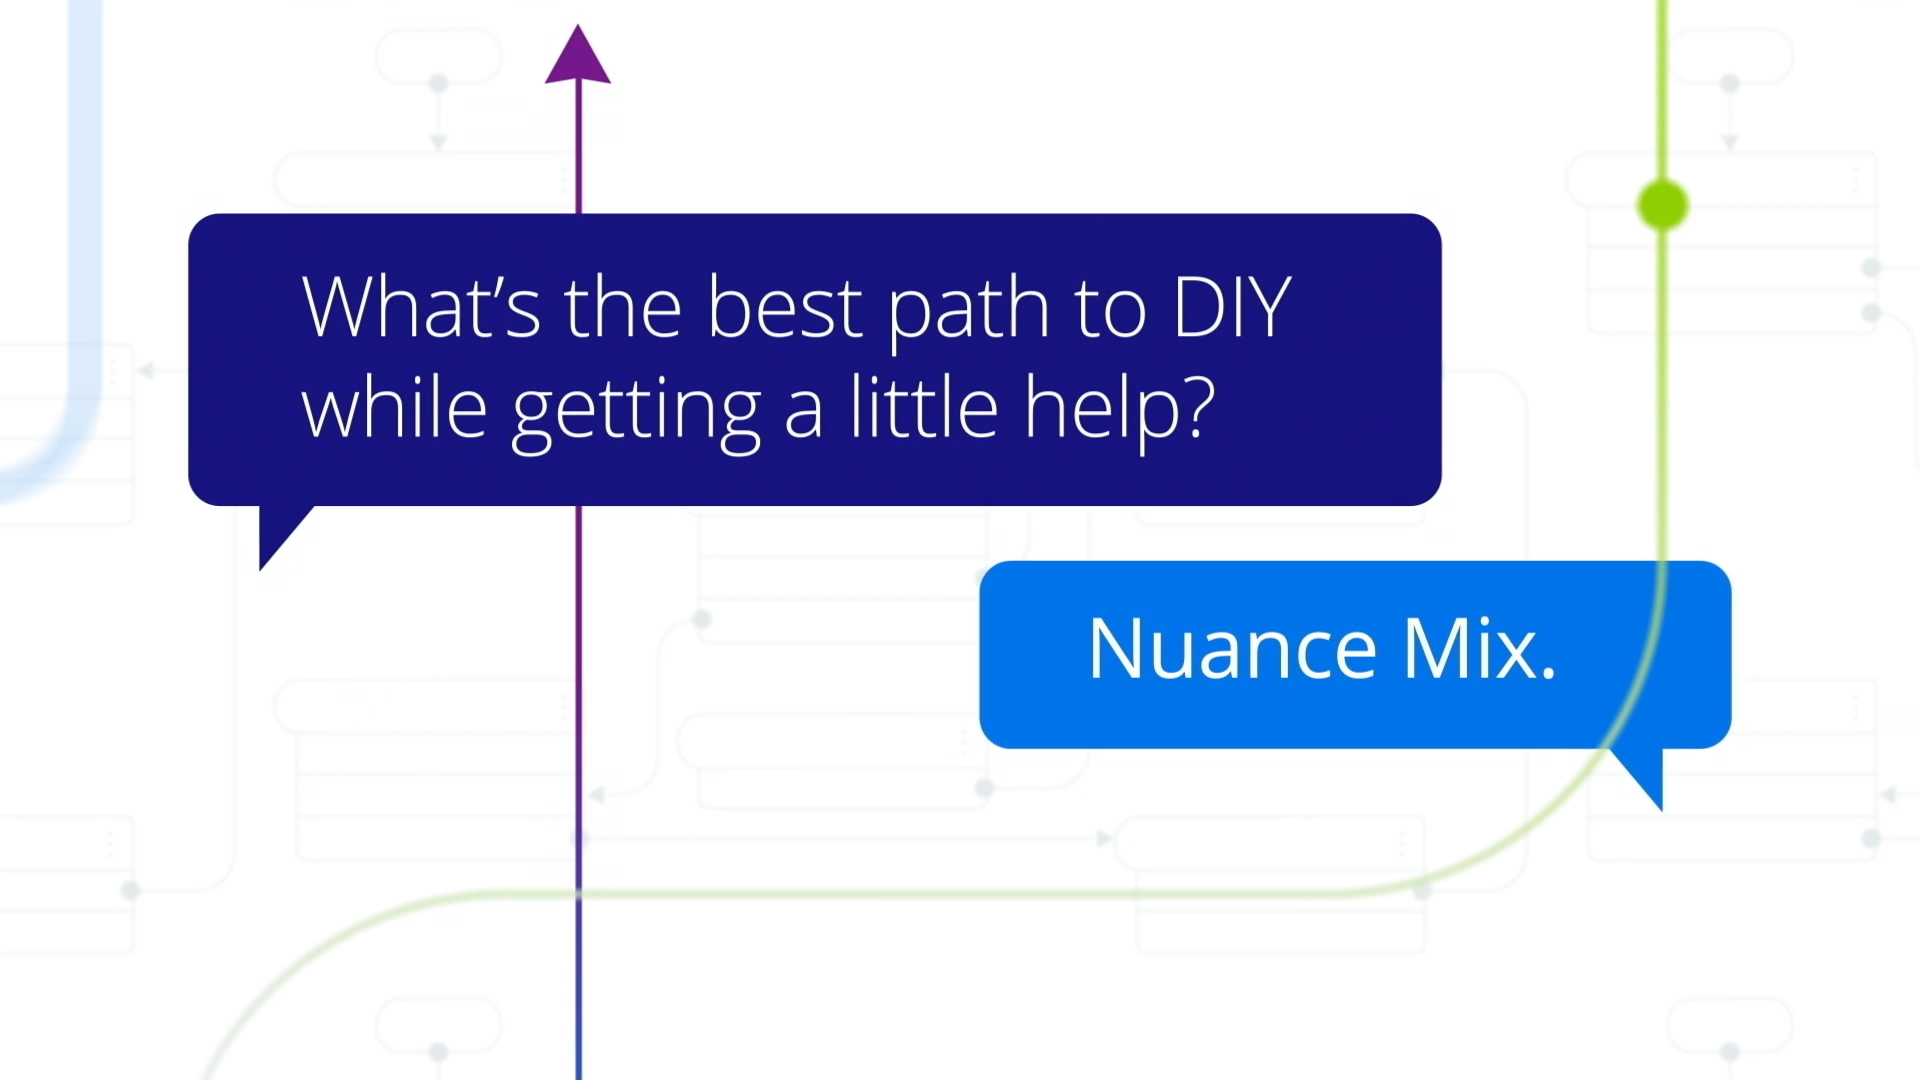 A still frame from the explainer video created for Nuance Mix.